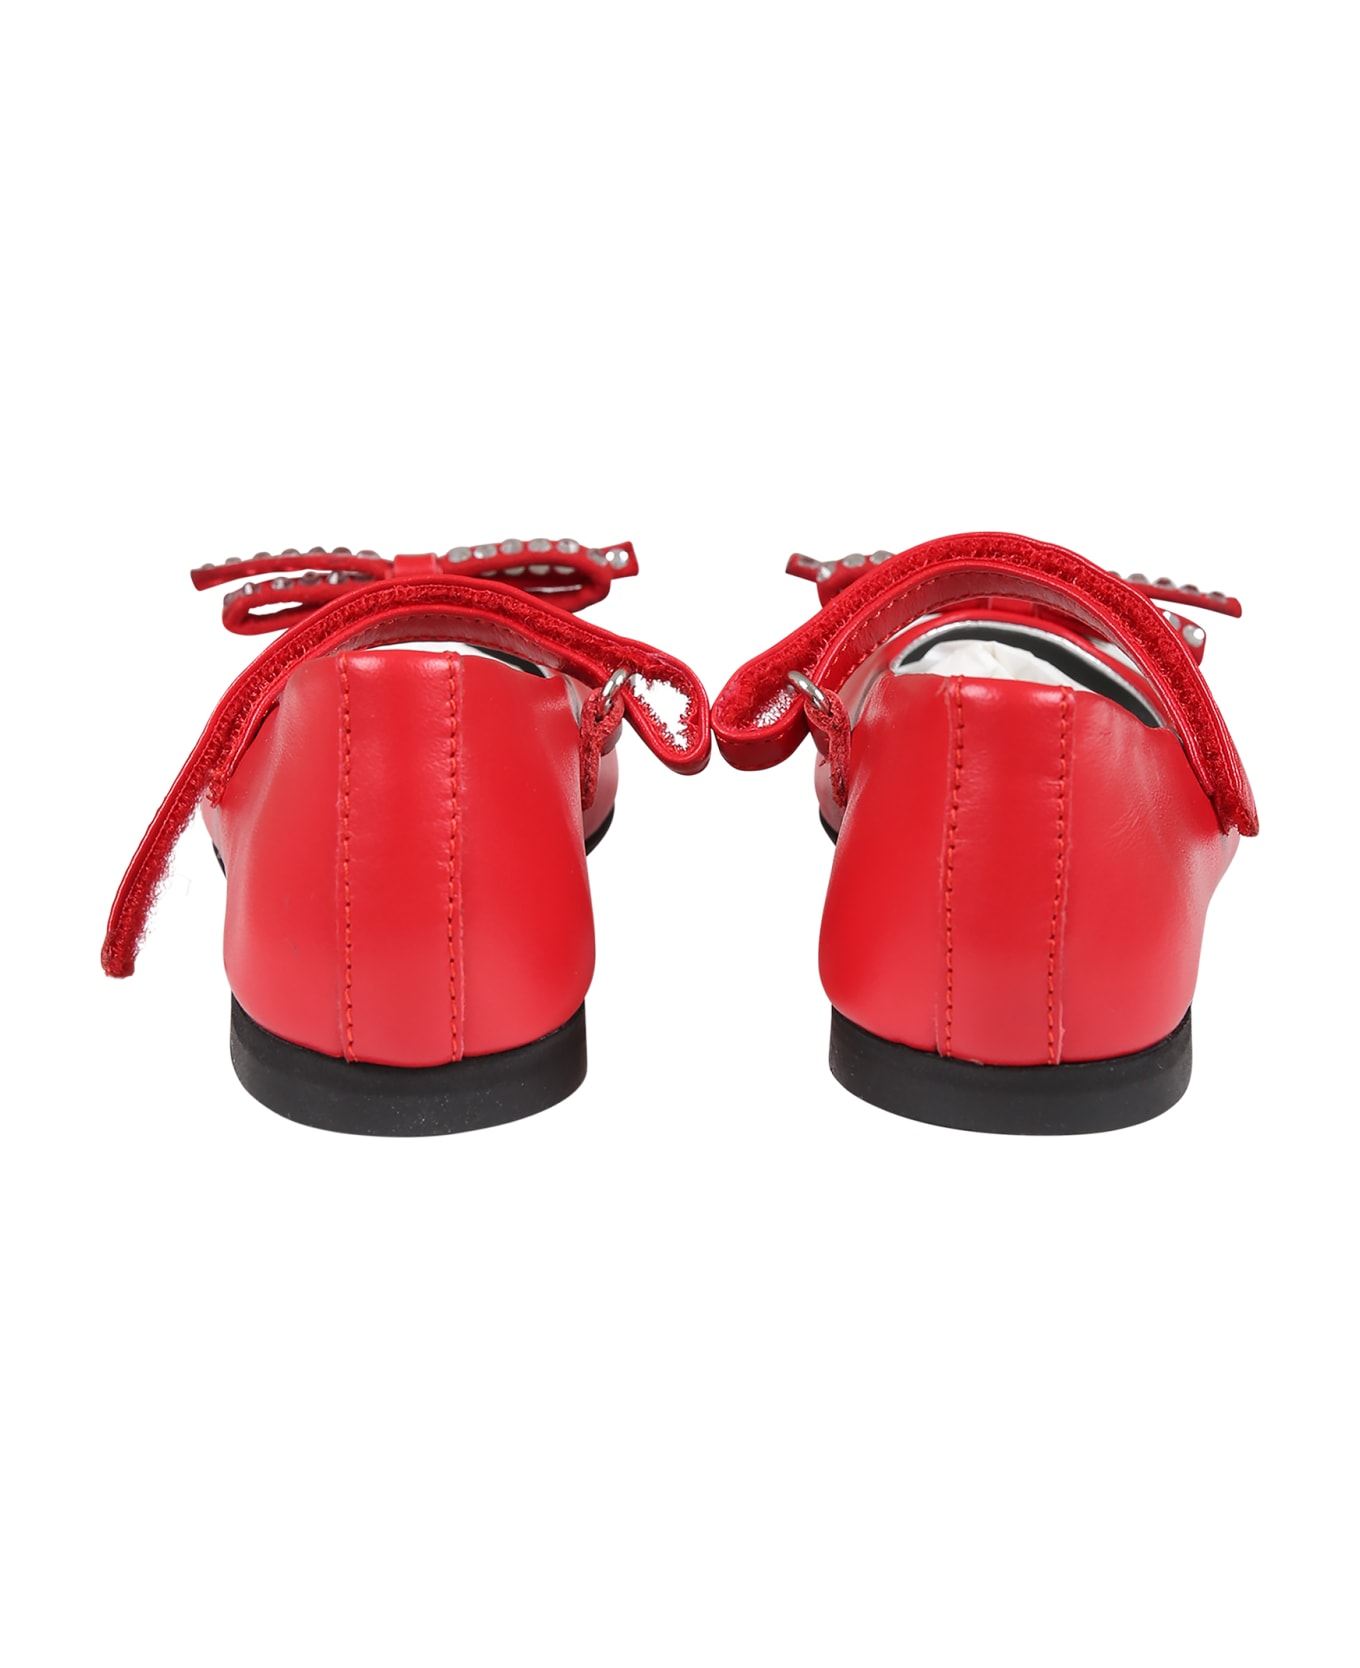 Monnalisa Red Ballet Flats For Girl With Bow - Red